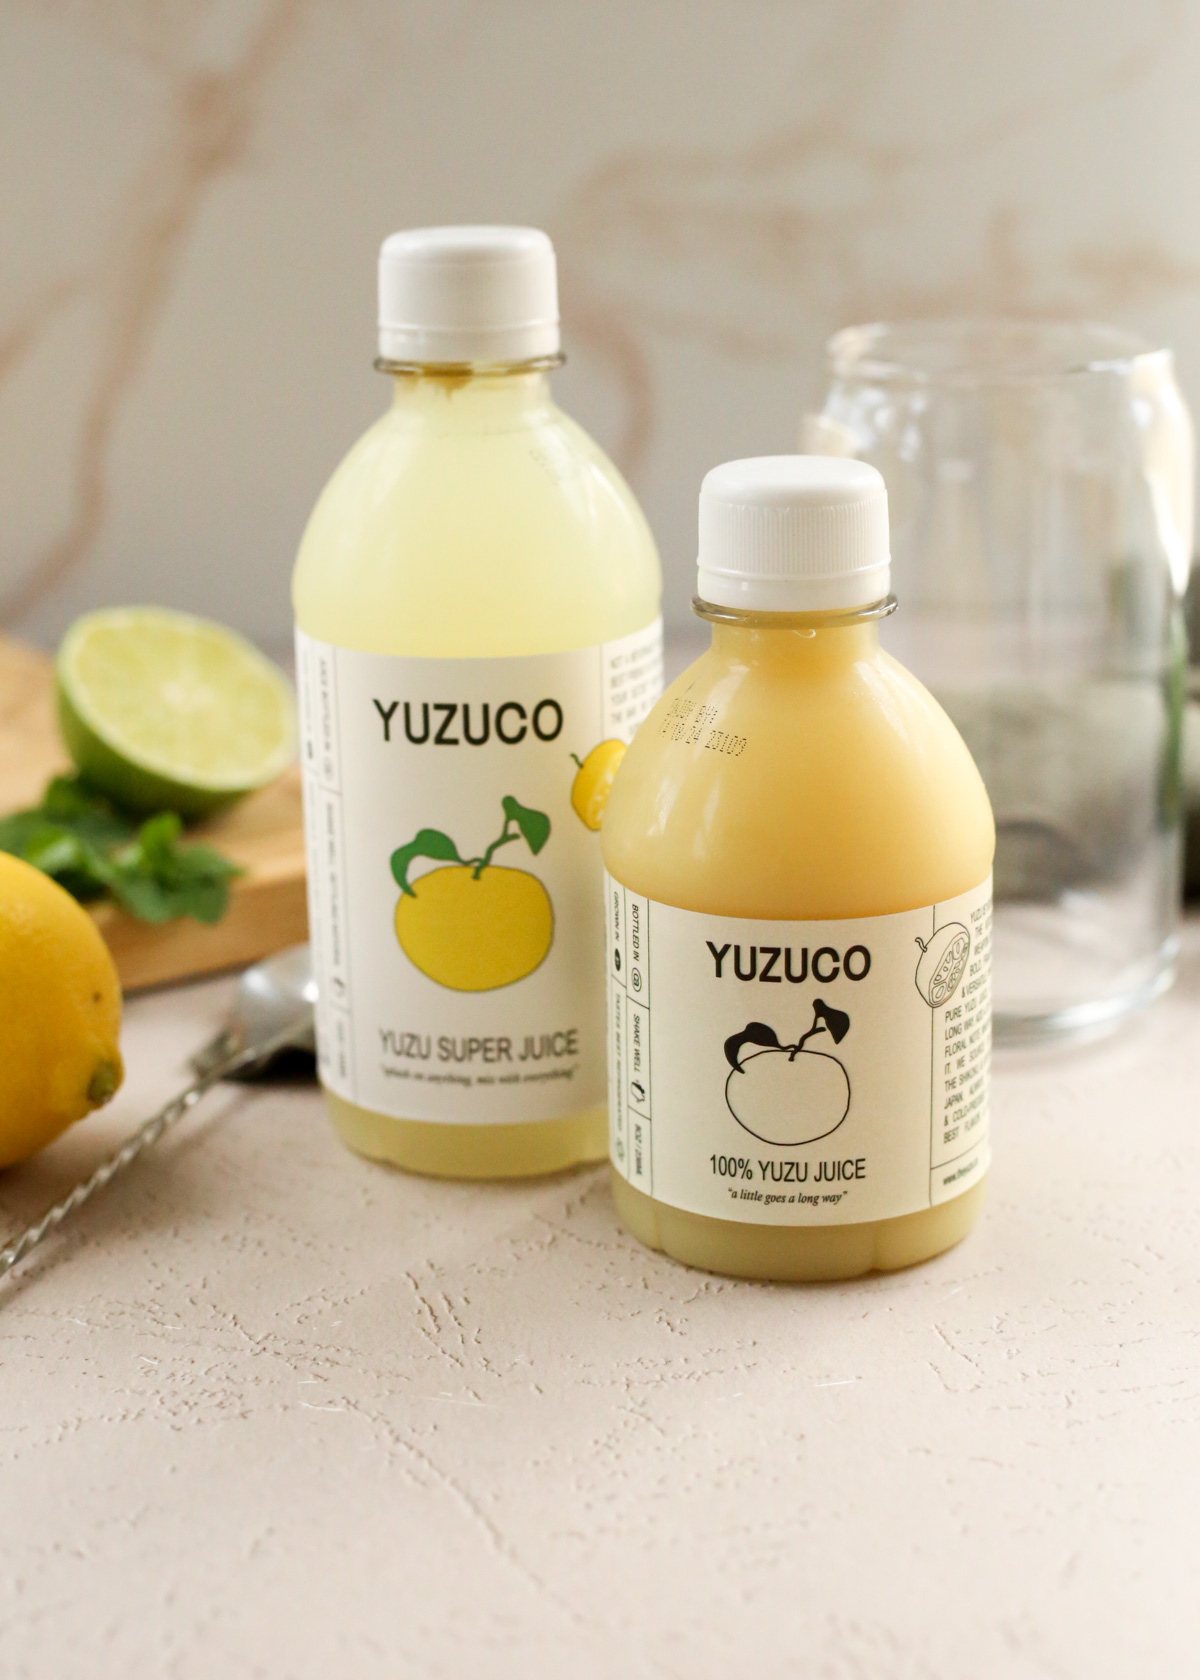 Two bottles with Yuzu Co labels sit on a kitchen countertop, with a smaller bottle of 100% yuzu juice displayed slightly in front of a larger bottle of yuzu super juice. Both bottles are filled with a light yellow citrus juice with white caps fastened